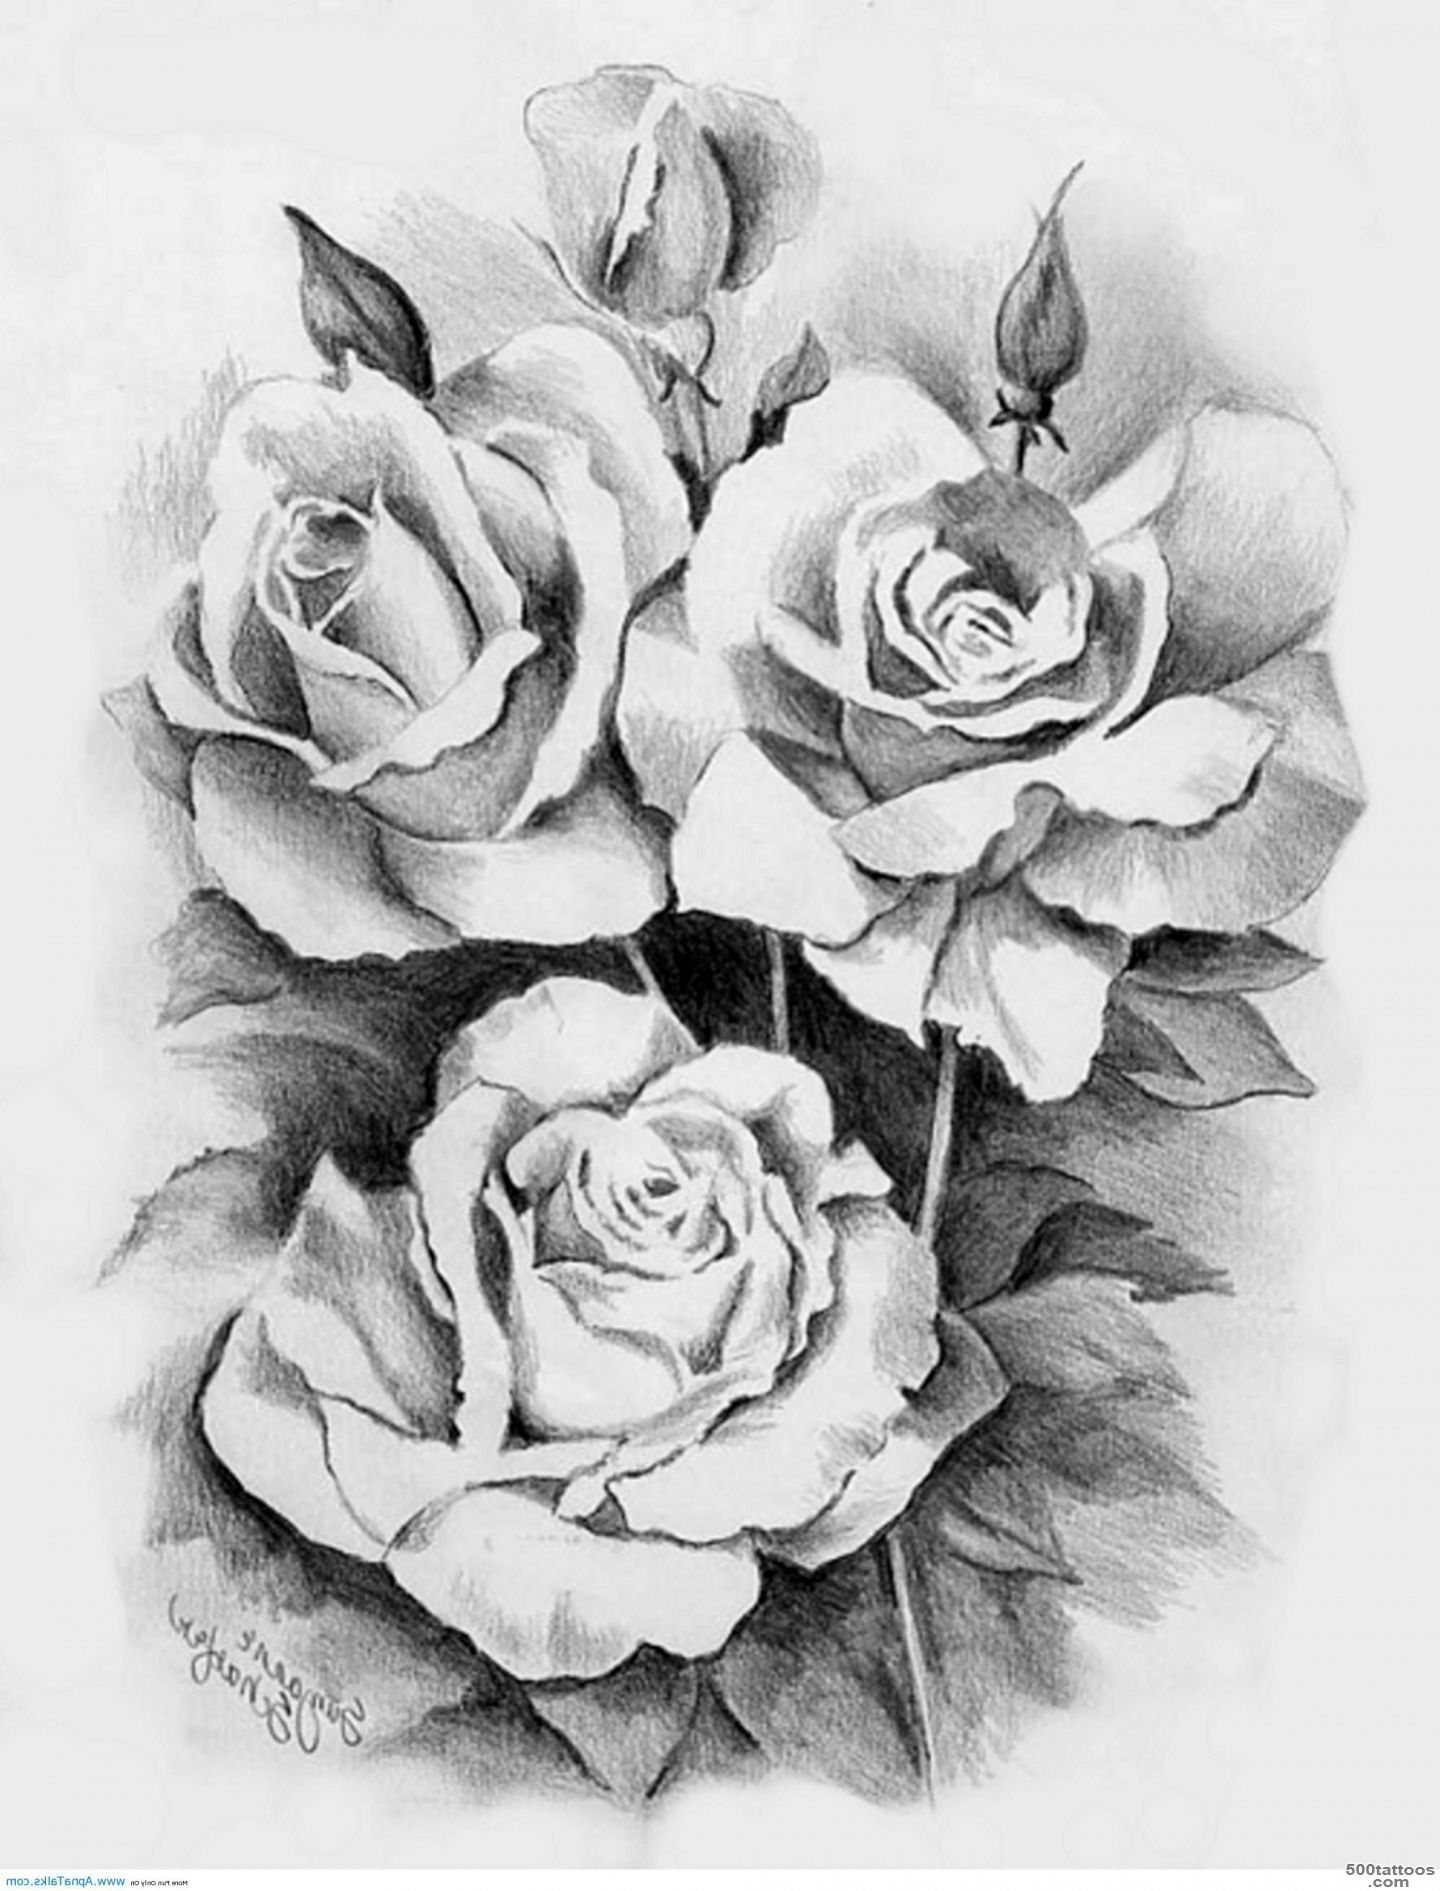 10 White Rose Tattoo Samples And Design Ideas_7